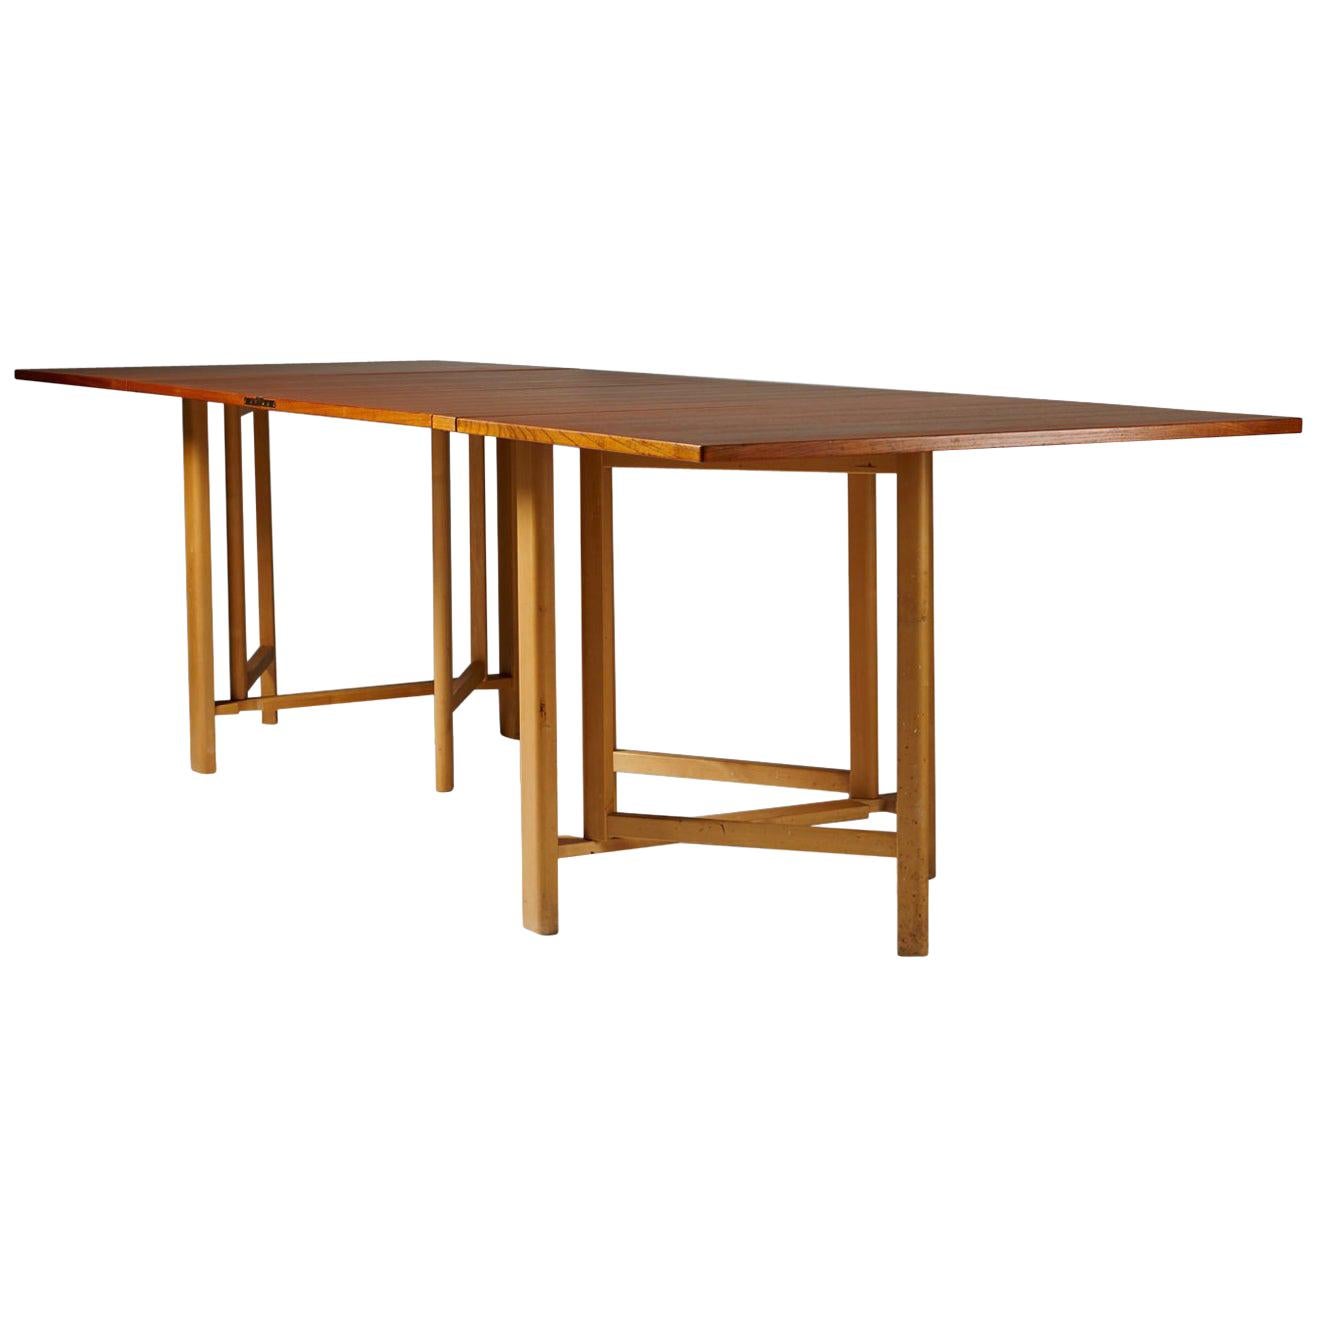 Dining Table “Maria Flap” Designed by Bruno Mathsson, Sweden, 1965